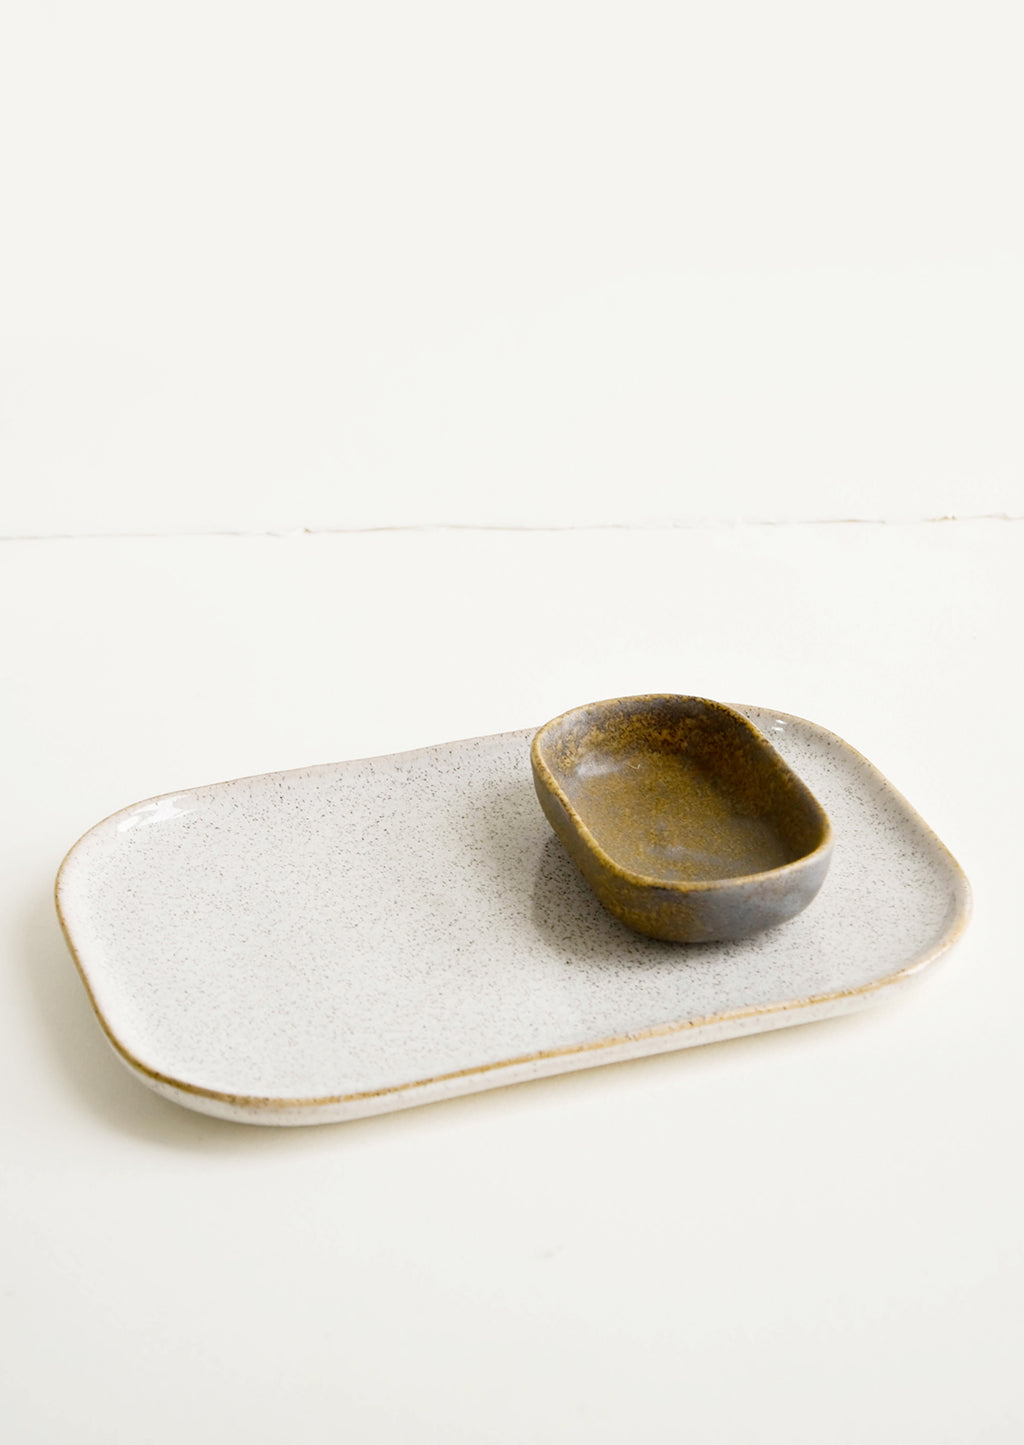 4: Ceramic Tray & Sauce Dishe in White & Brown - LEIF